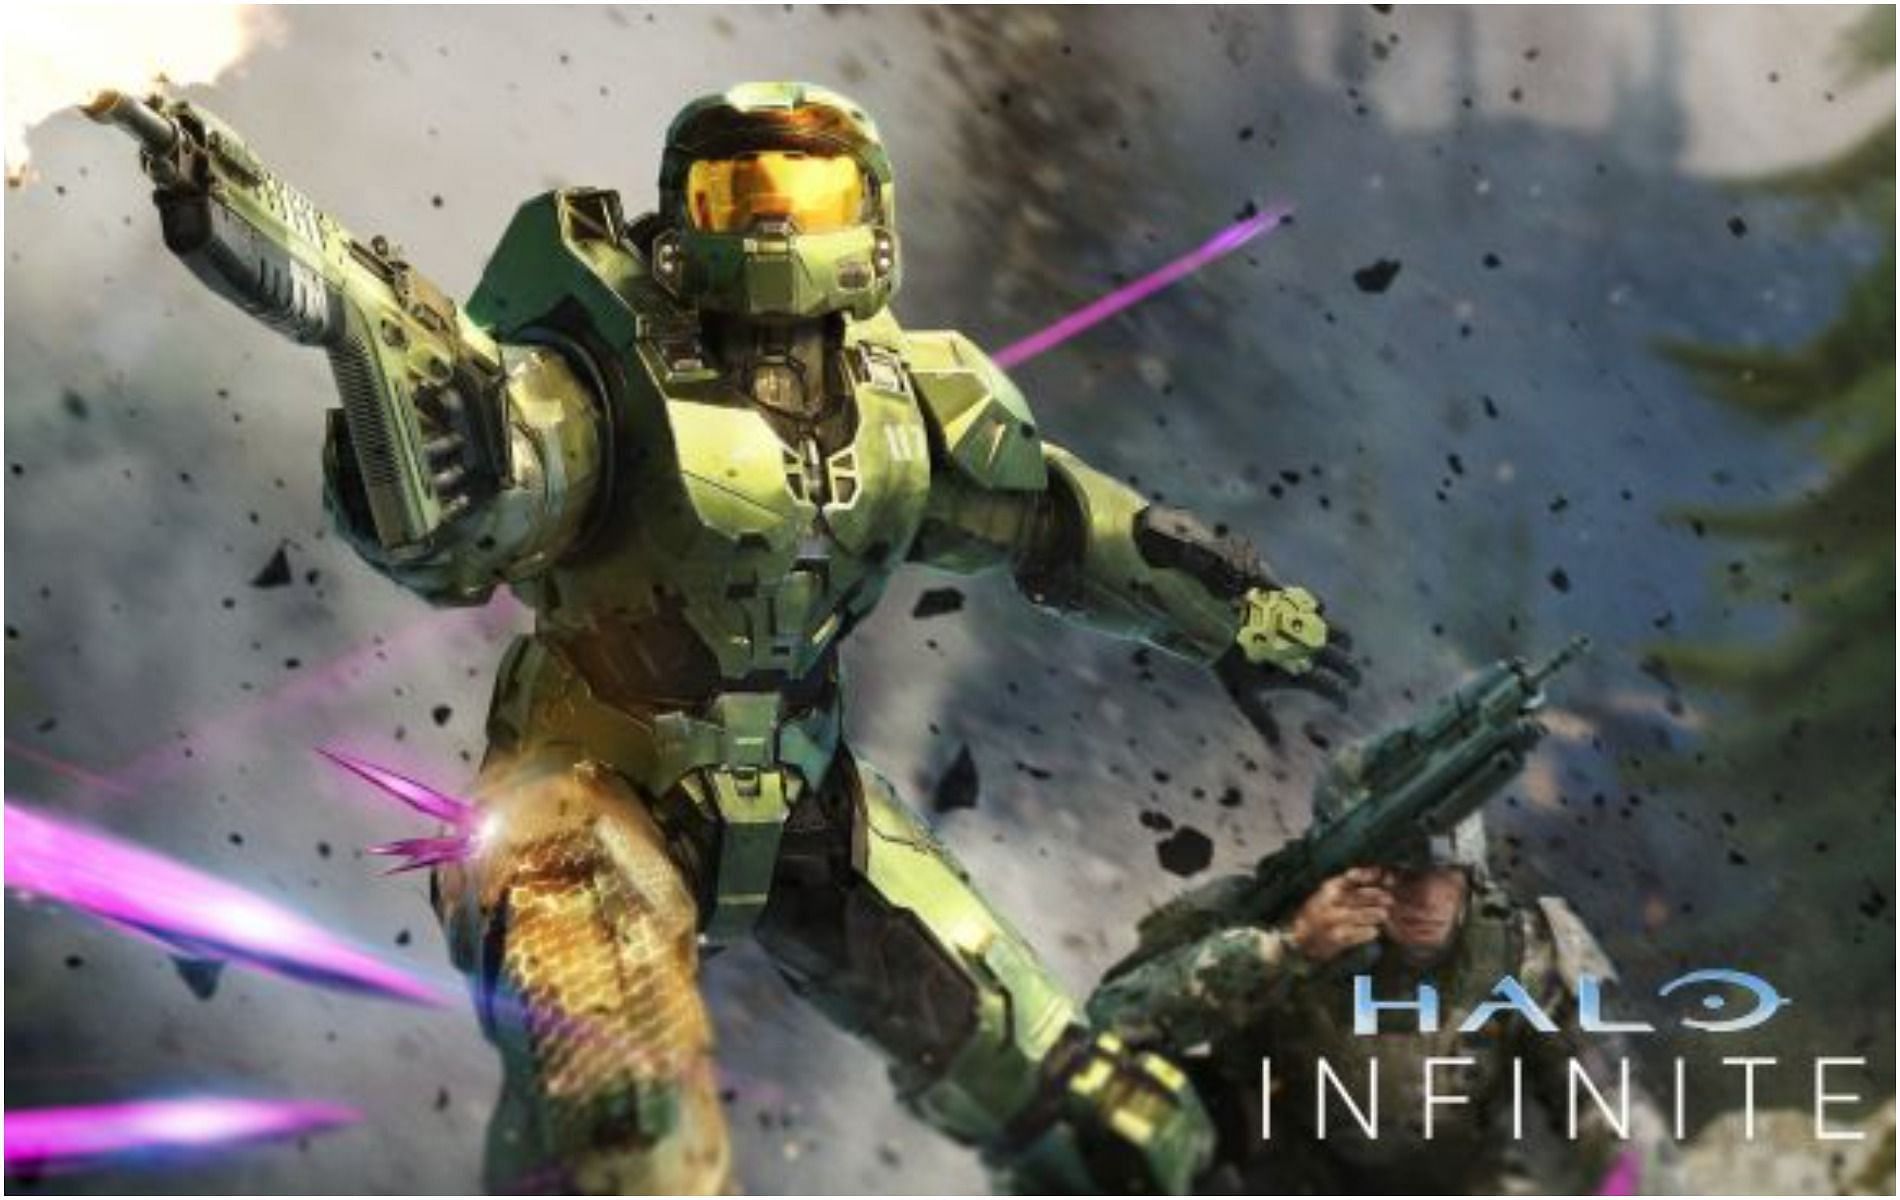 Halo Infinite matchmaking has some serious issues (Image via 343 industries)